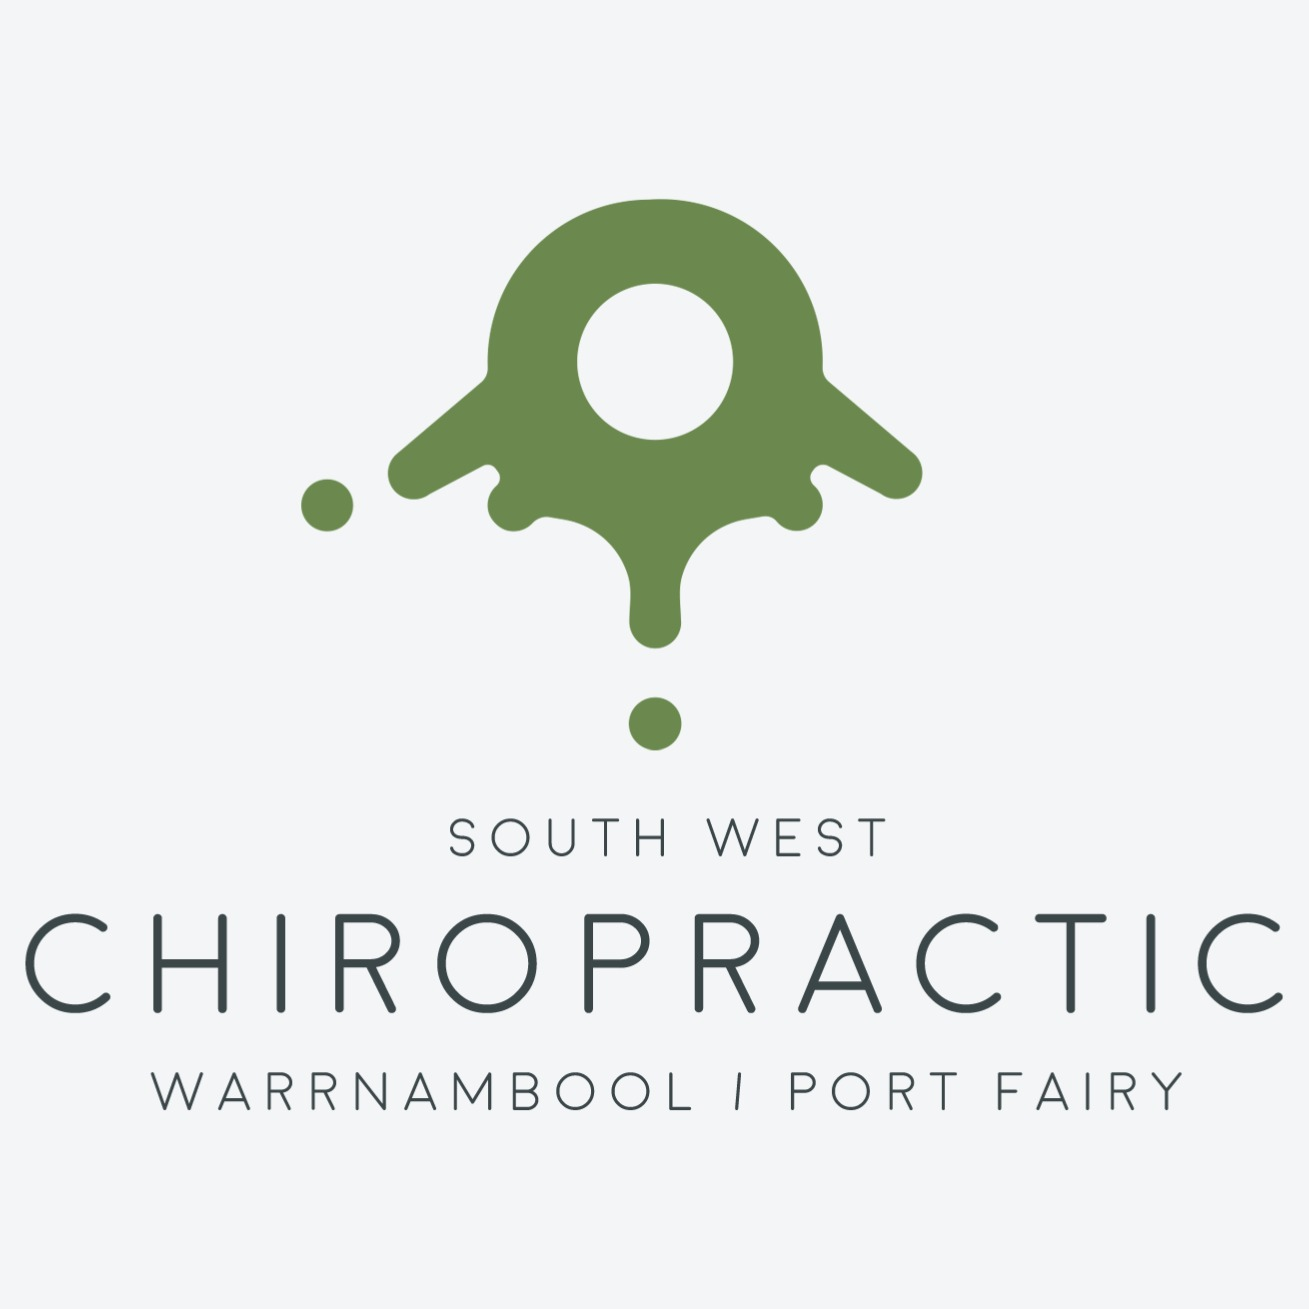 South West Chiropractic Warrnambool and Port Fairy Warrnambool